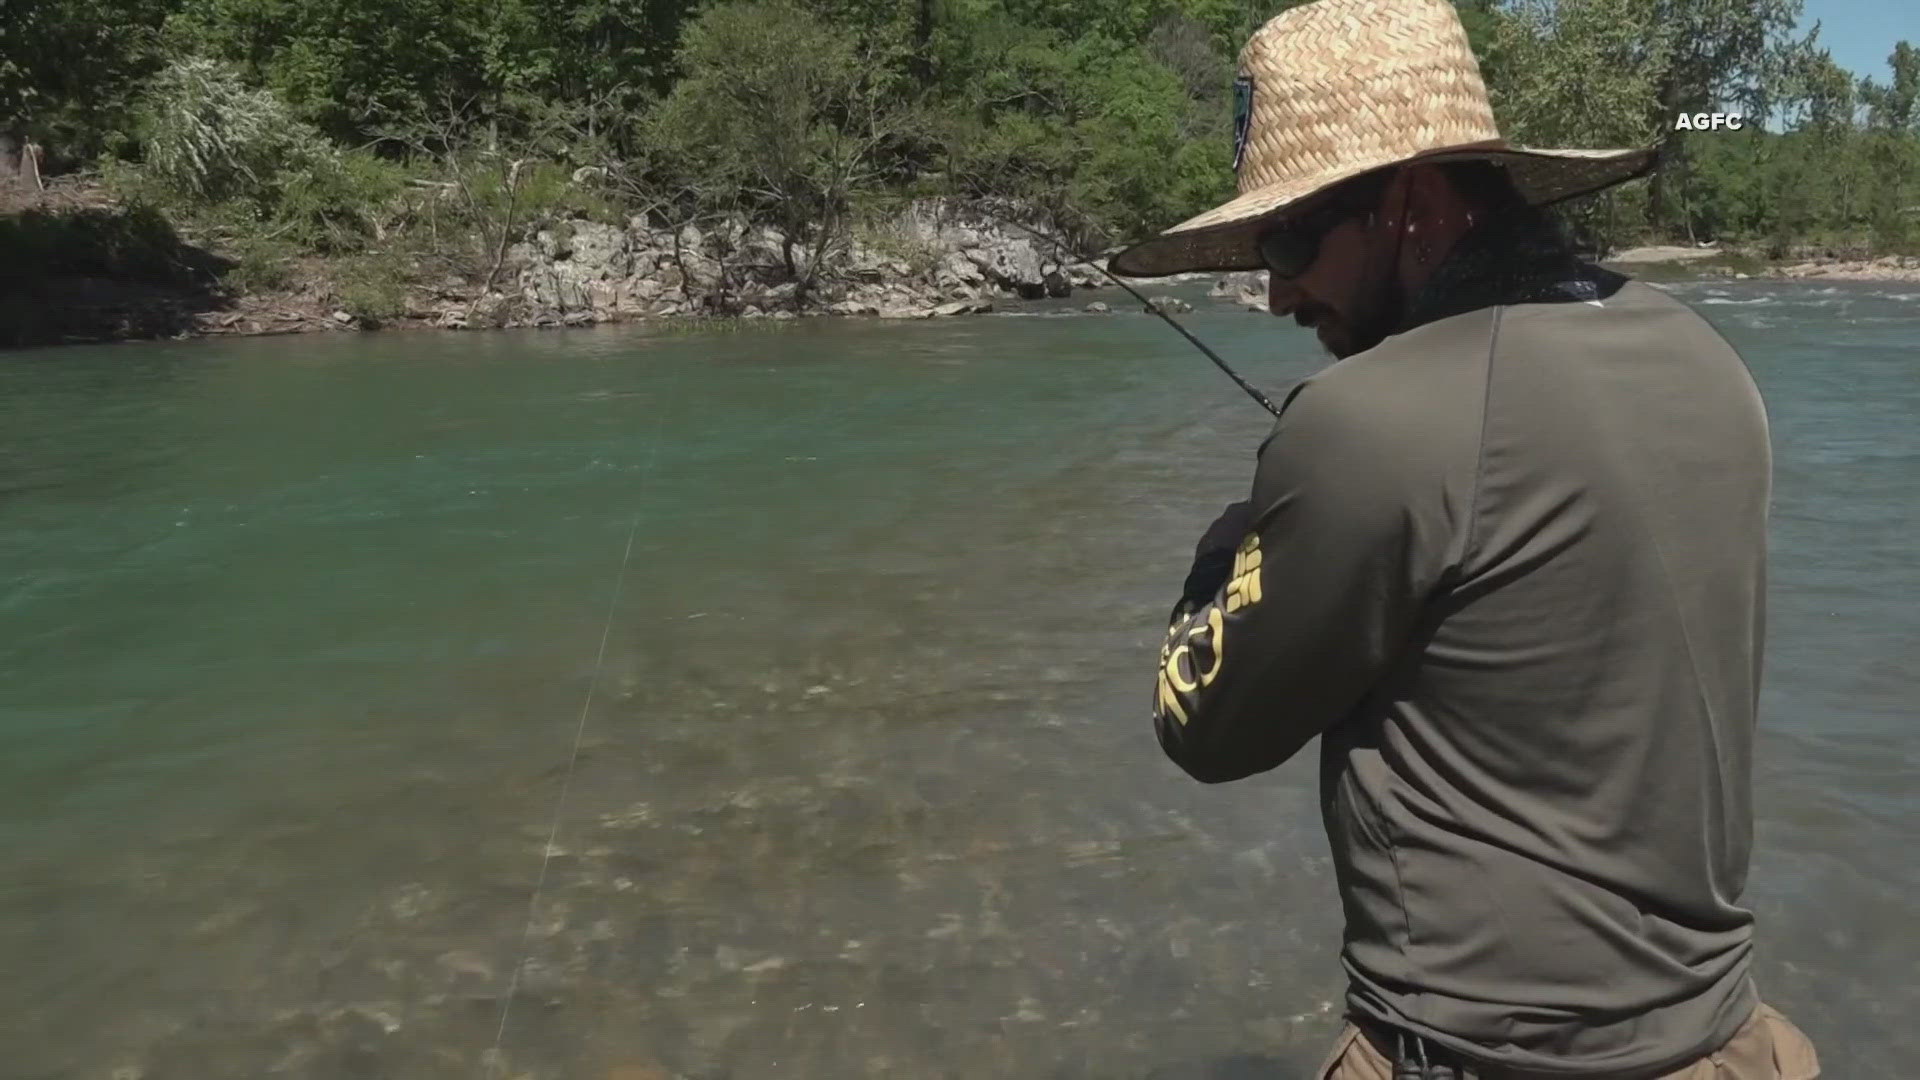 Jim Harris with Arkansas Game & Fish joins Hayden Balgavy to discuss how people can treat dad to a nice day of fishing in Arkansas for Father’s Day.